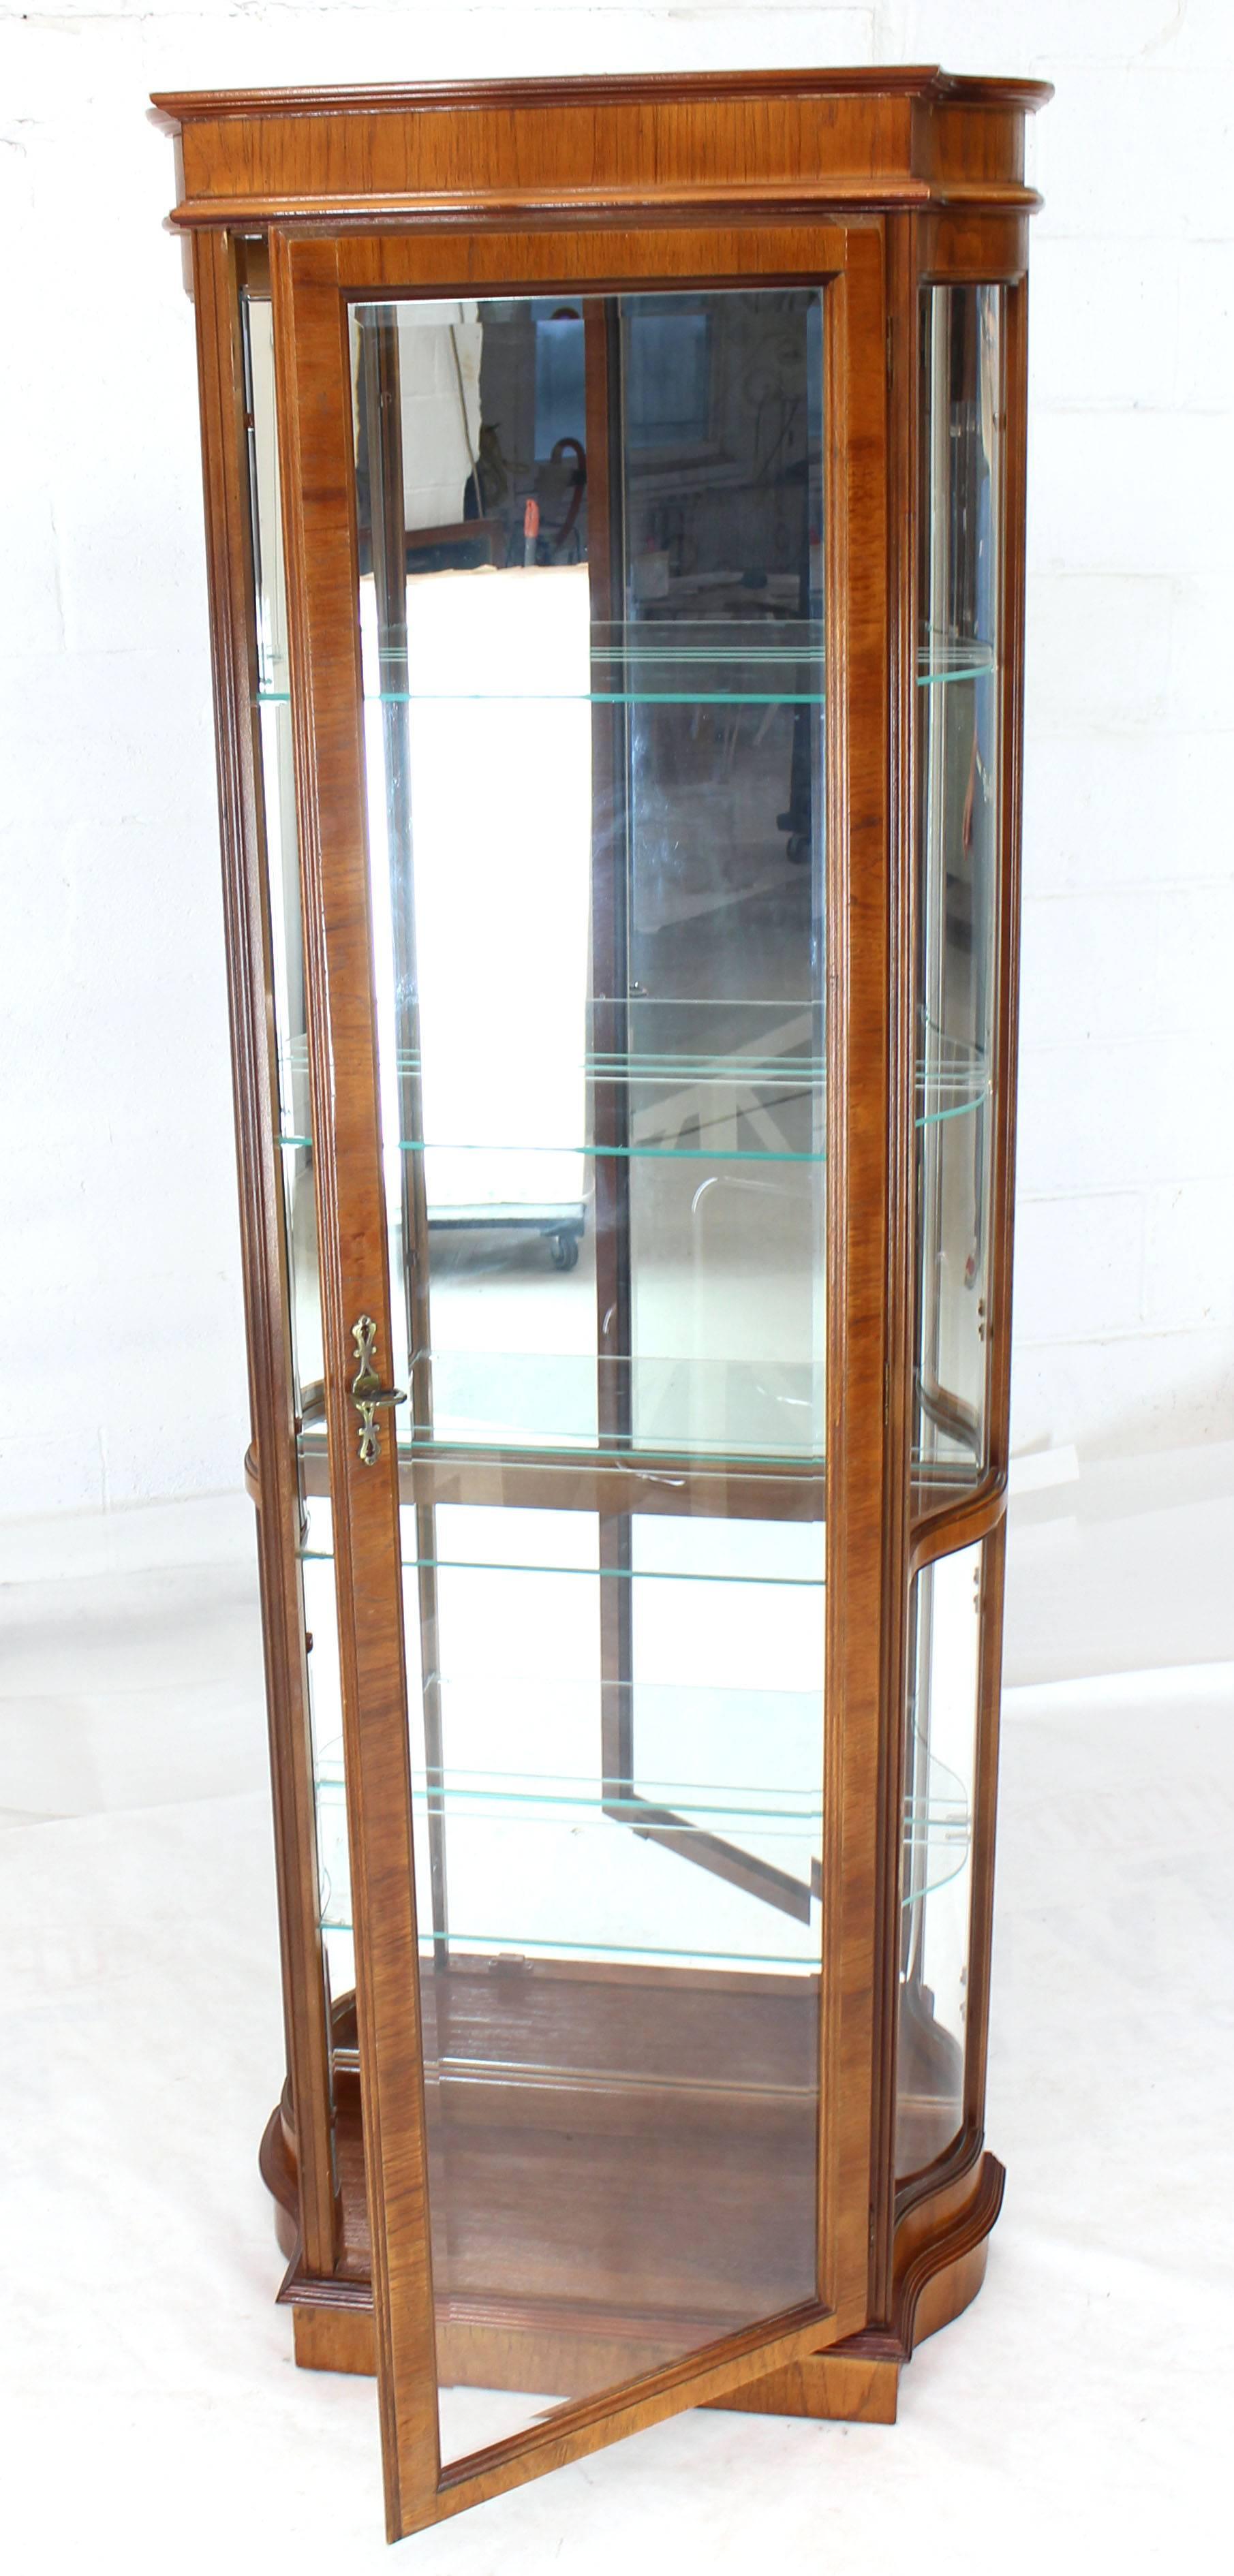 Lacquered Tall Narrow Walnut and Mahogany Curved Glass Curio Cabinet